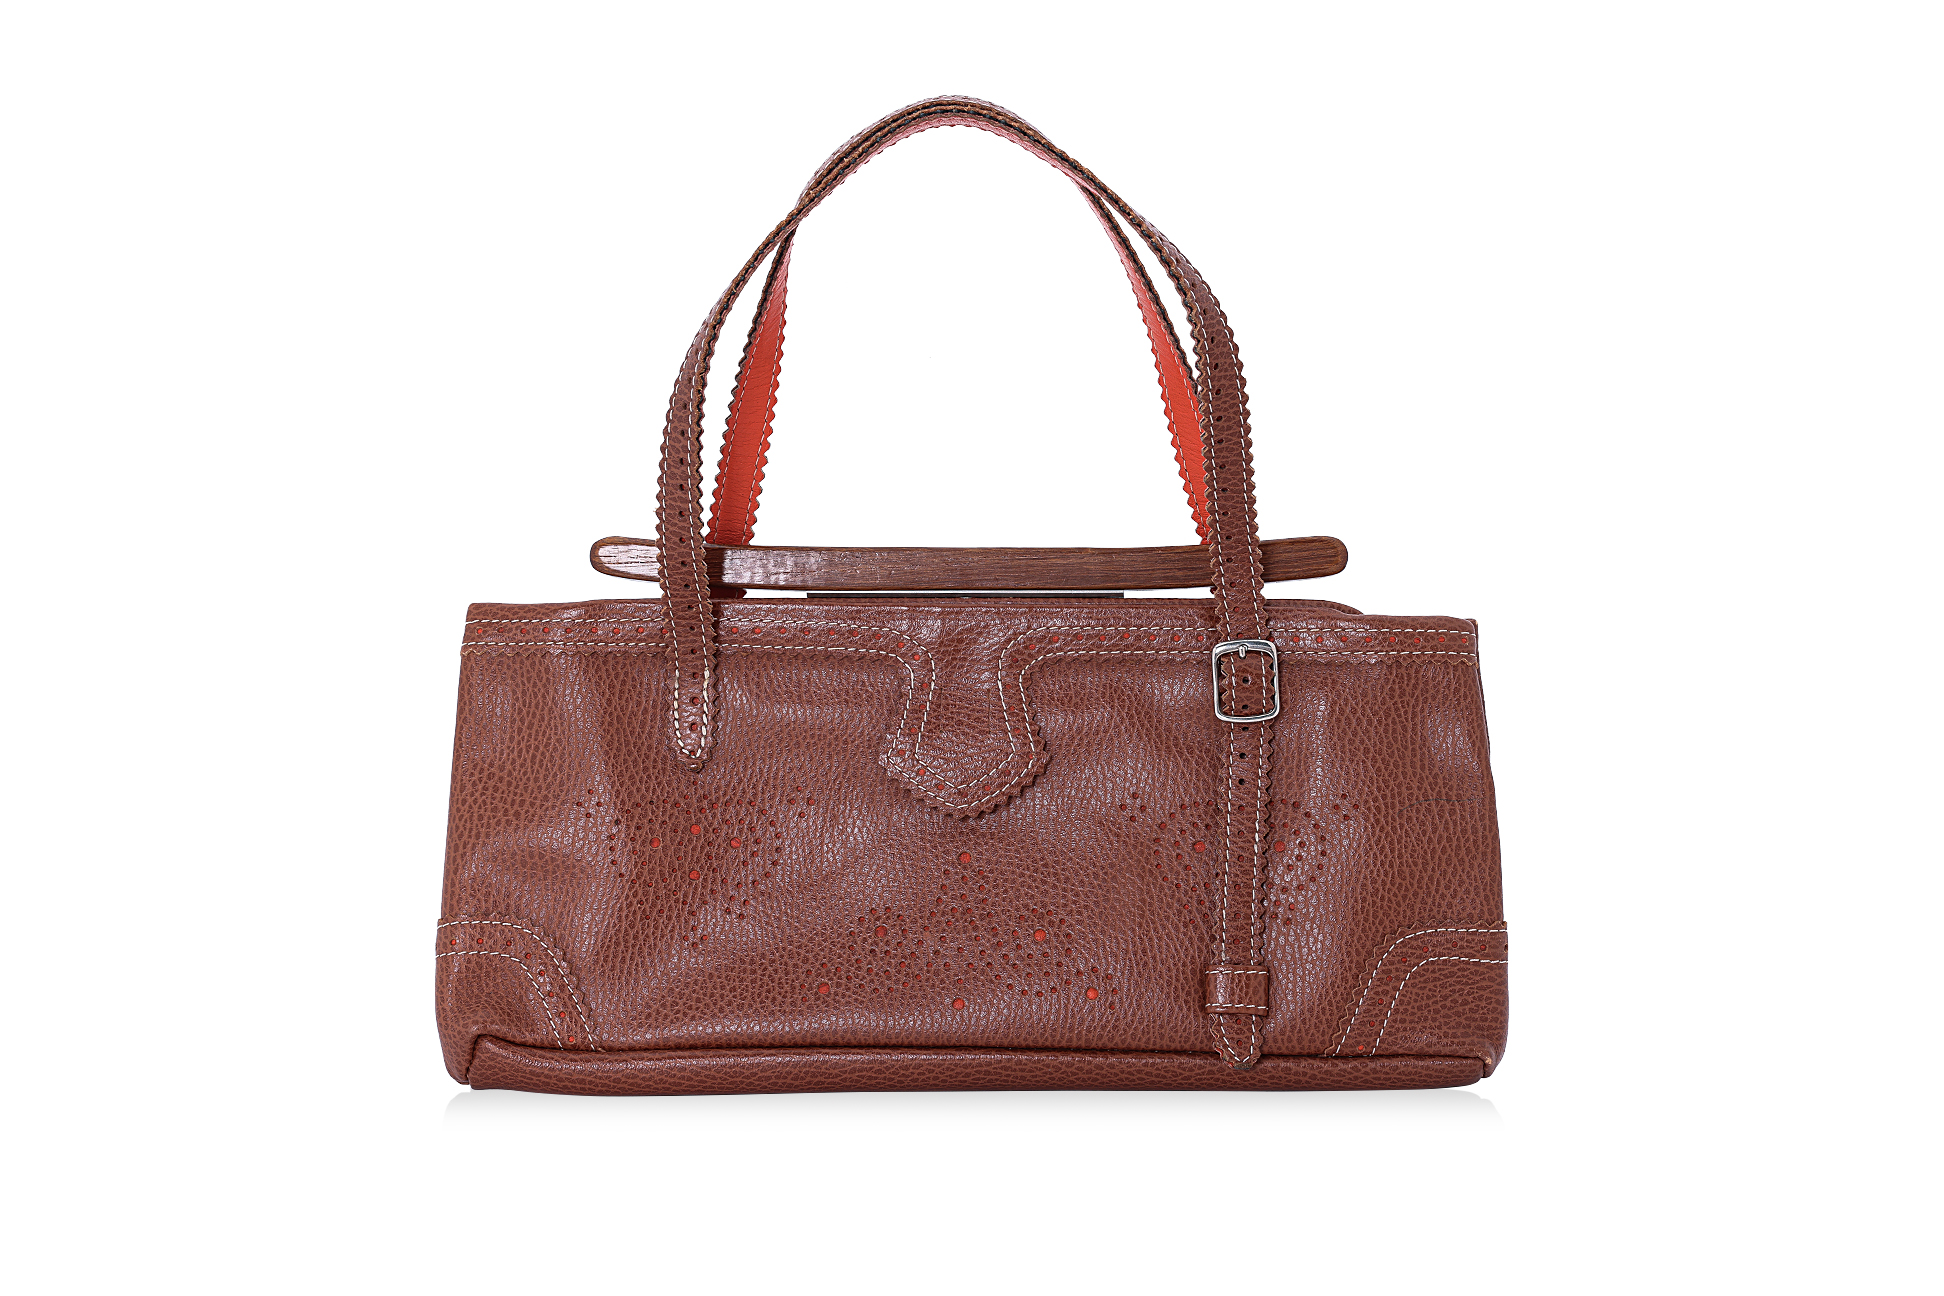 A JAMIN PUECH TOOLED SHOULDER BAG IN LEATHER